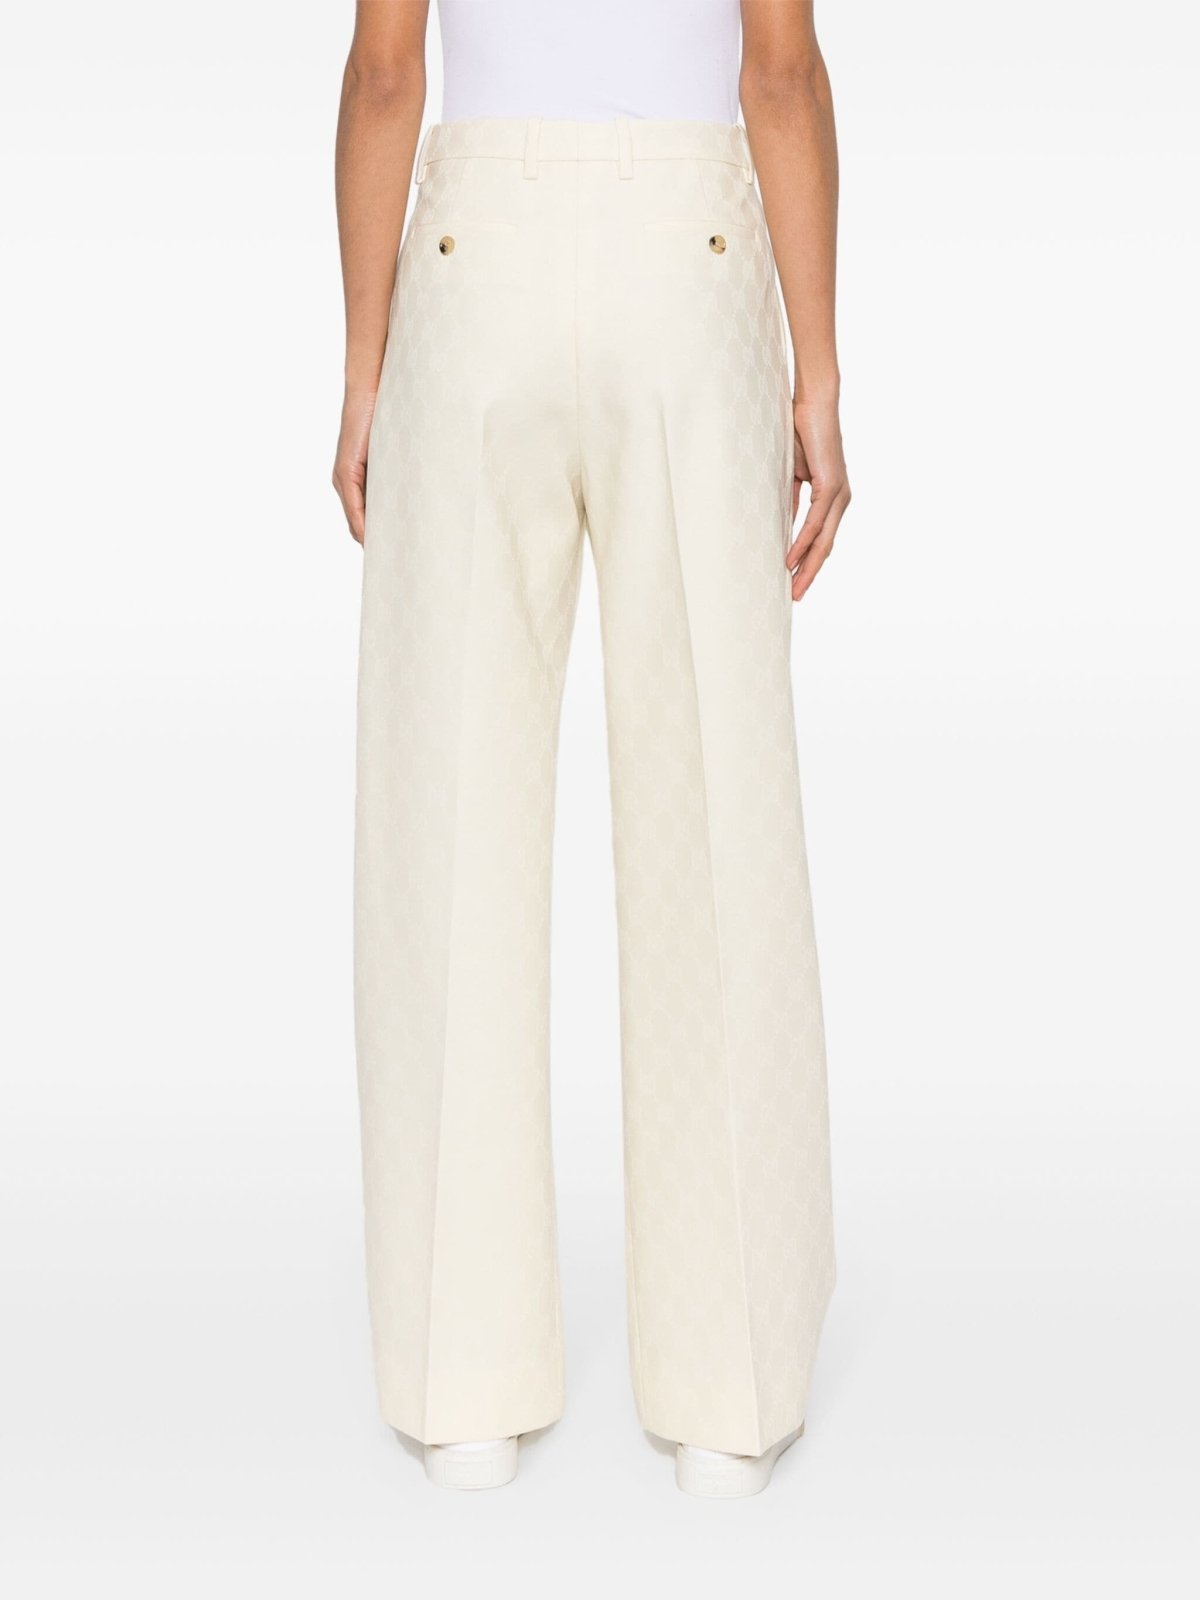 GucciIvory Wide-Leg Tailored Trousers at Fashion Clinic